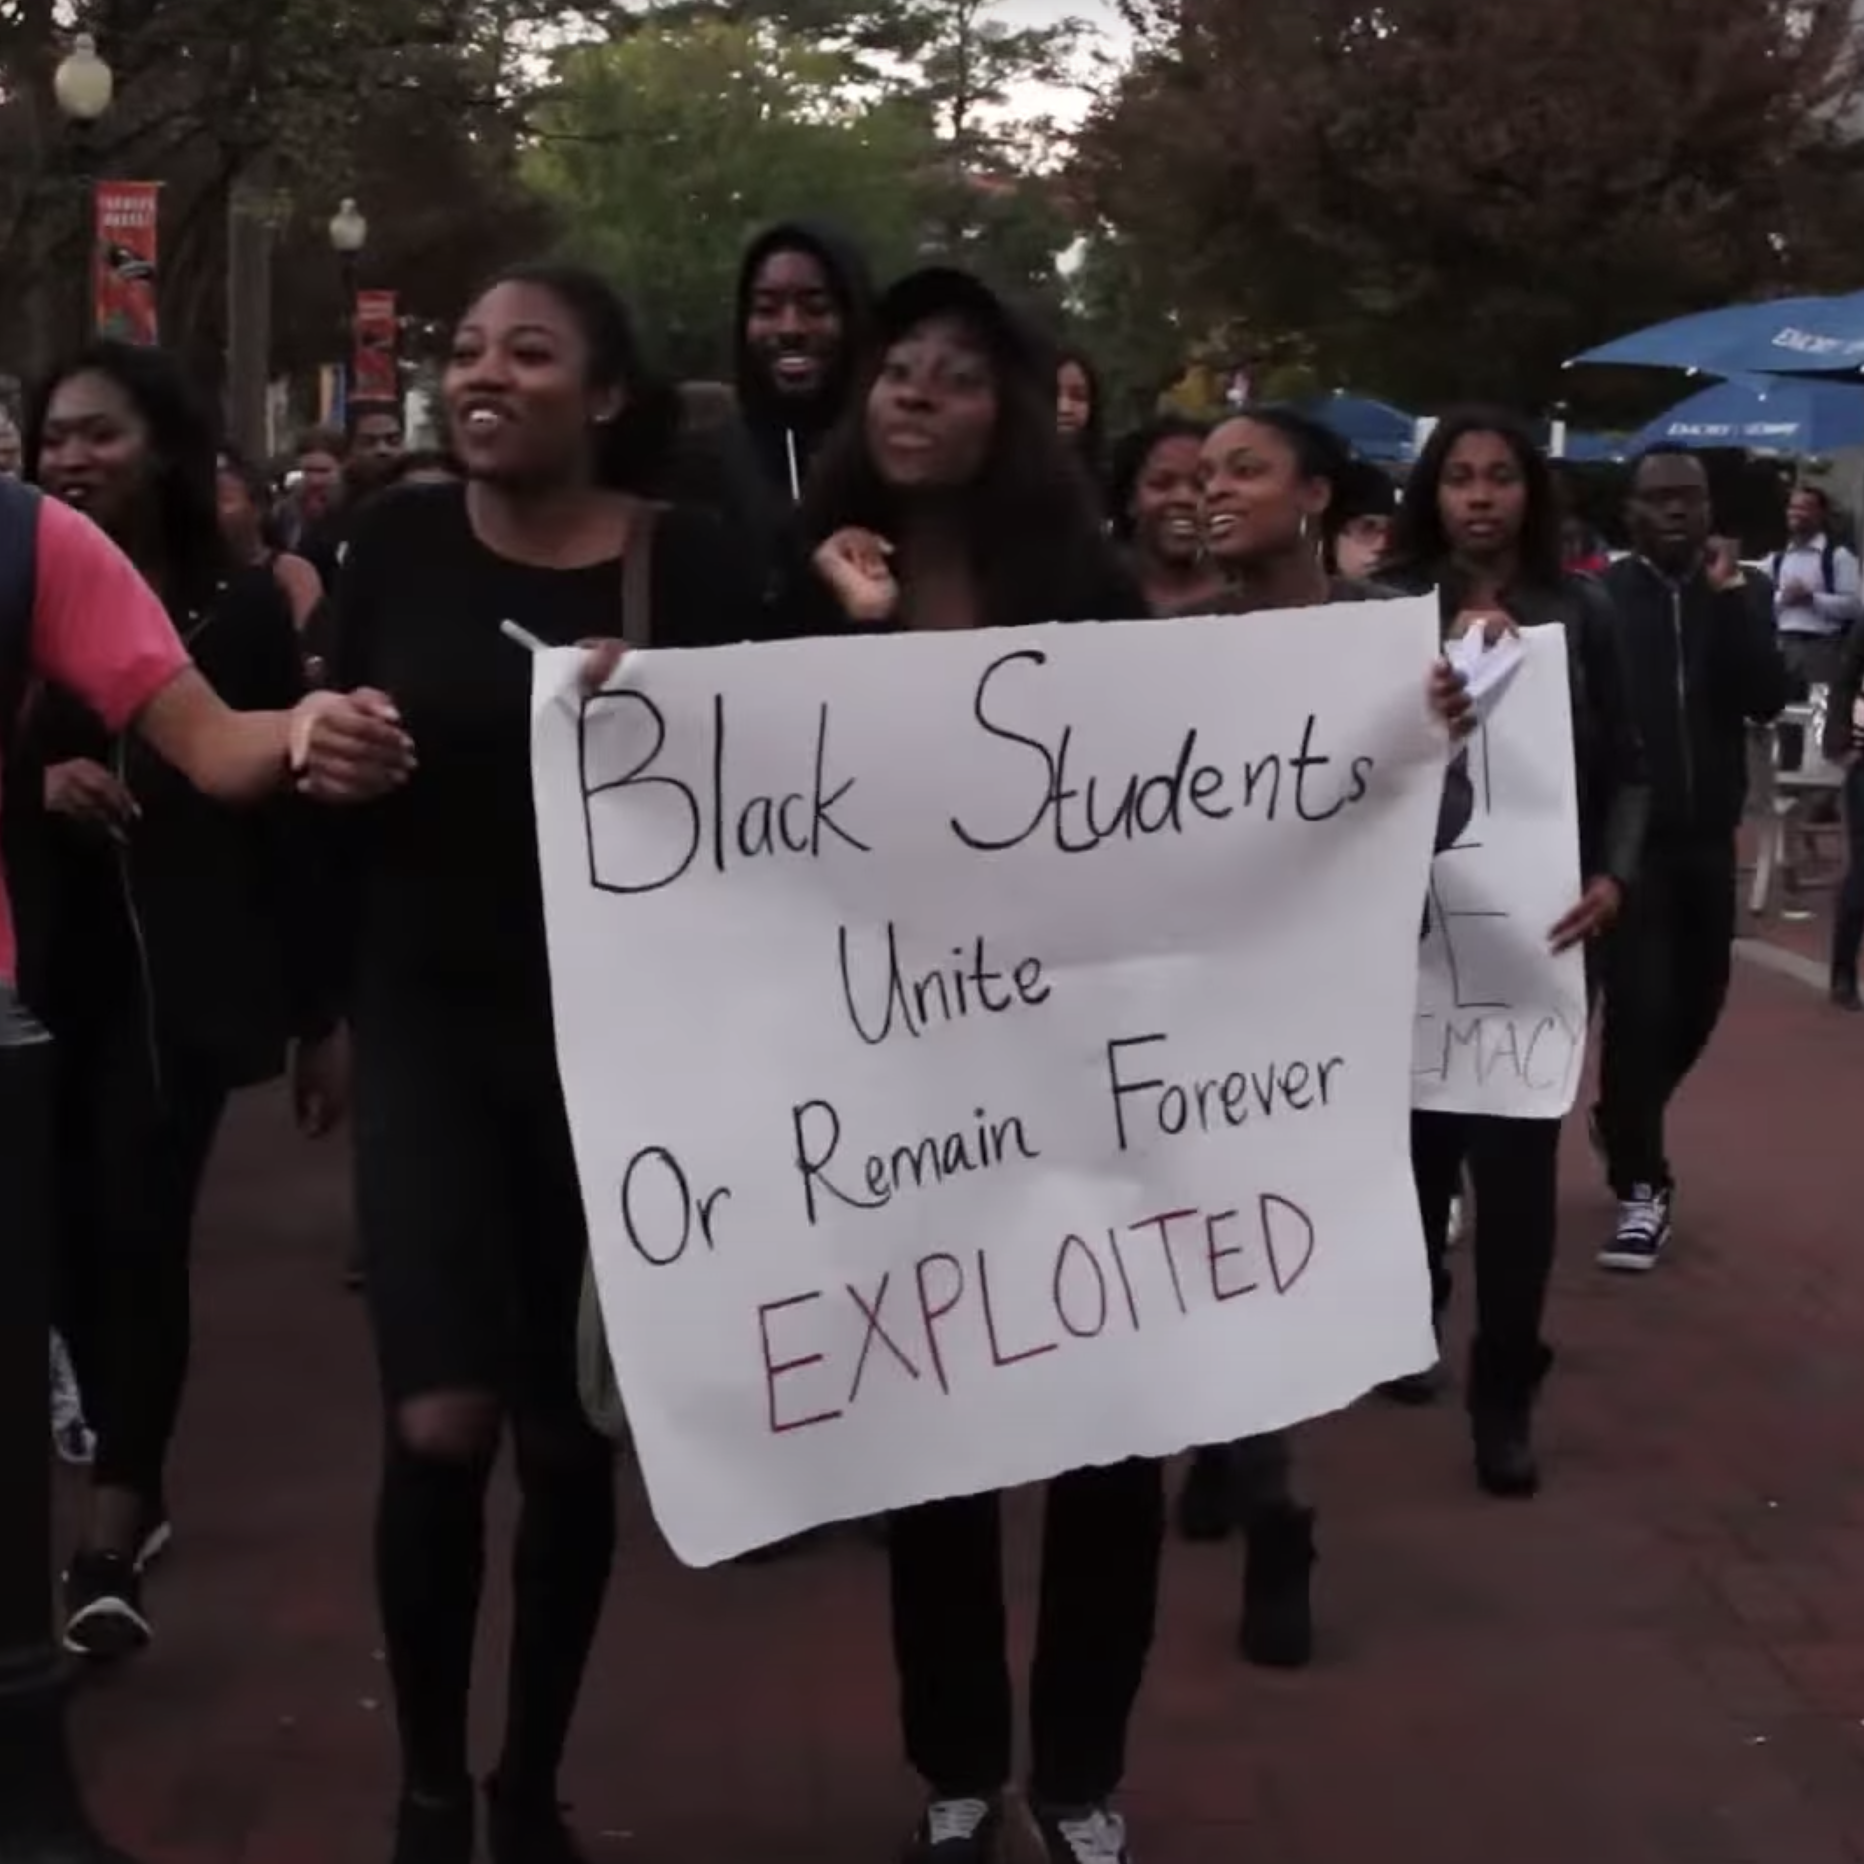 "Black Students Unite Or Remain Forever EXPLOITED" sign held by crowd of Emory demonstrators